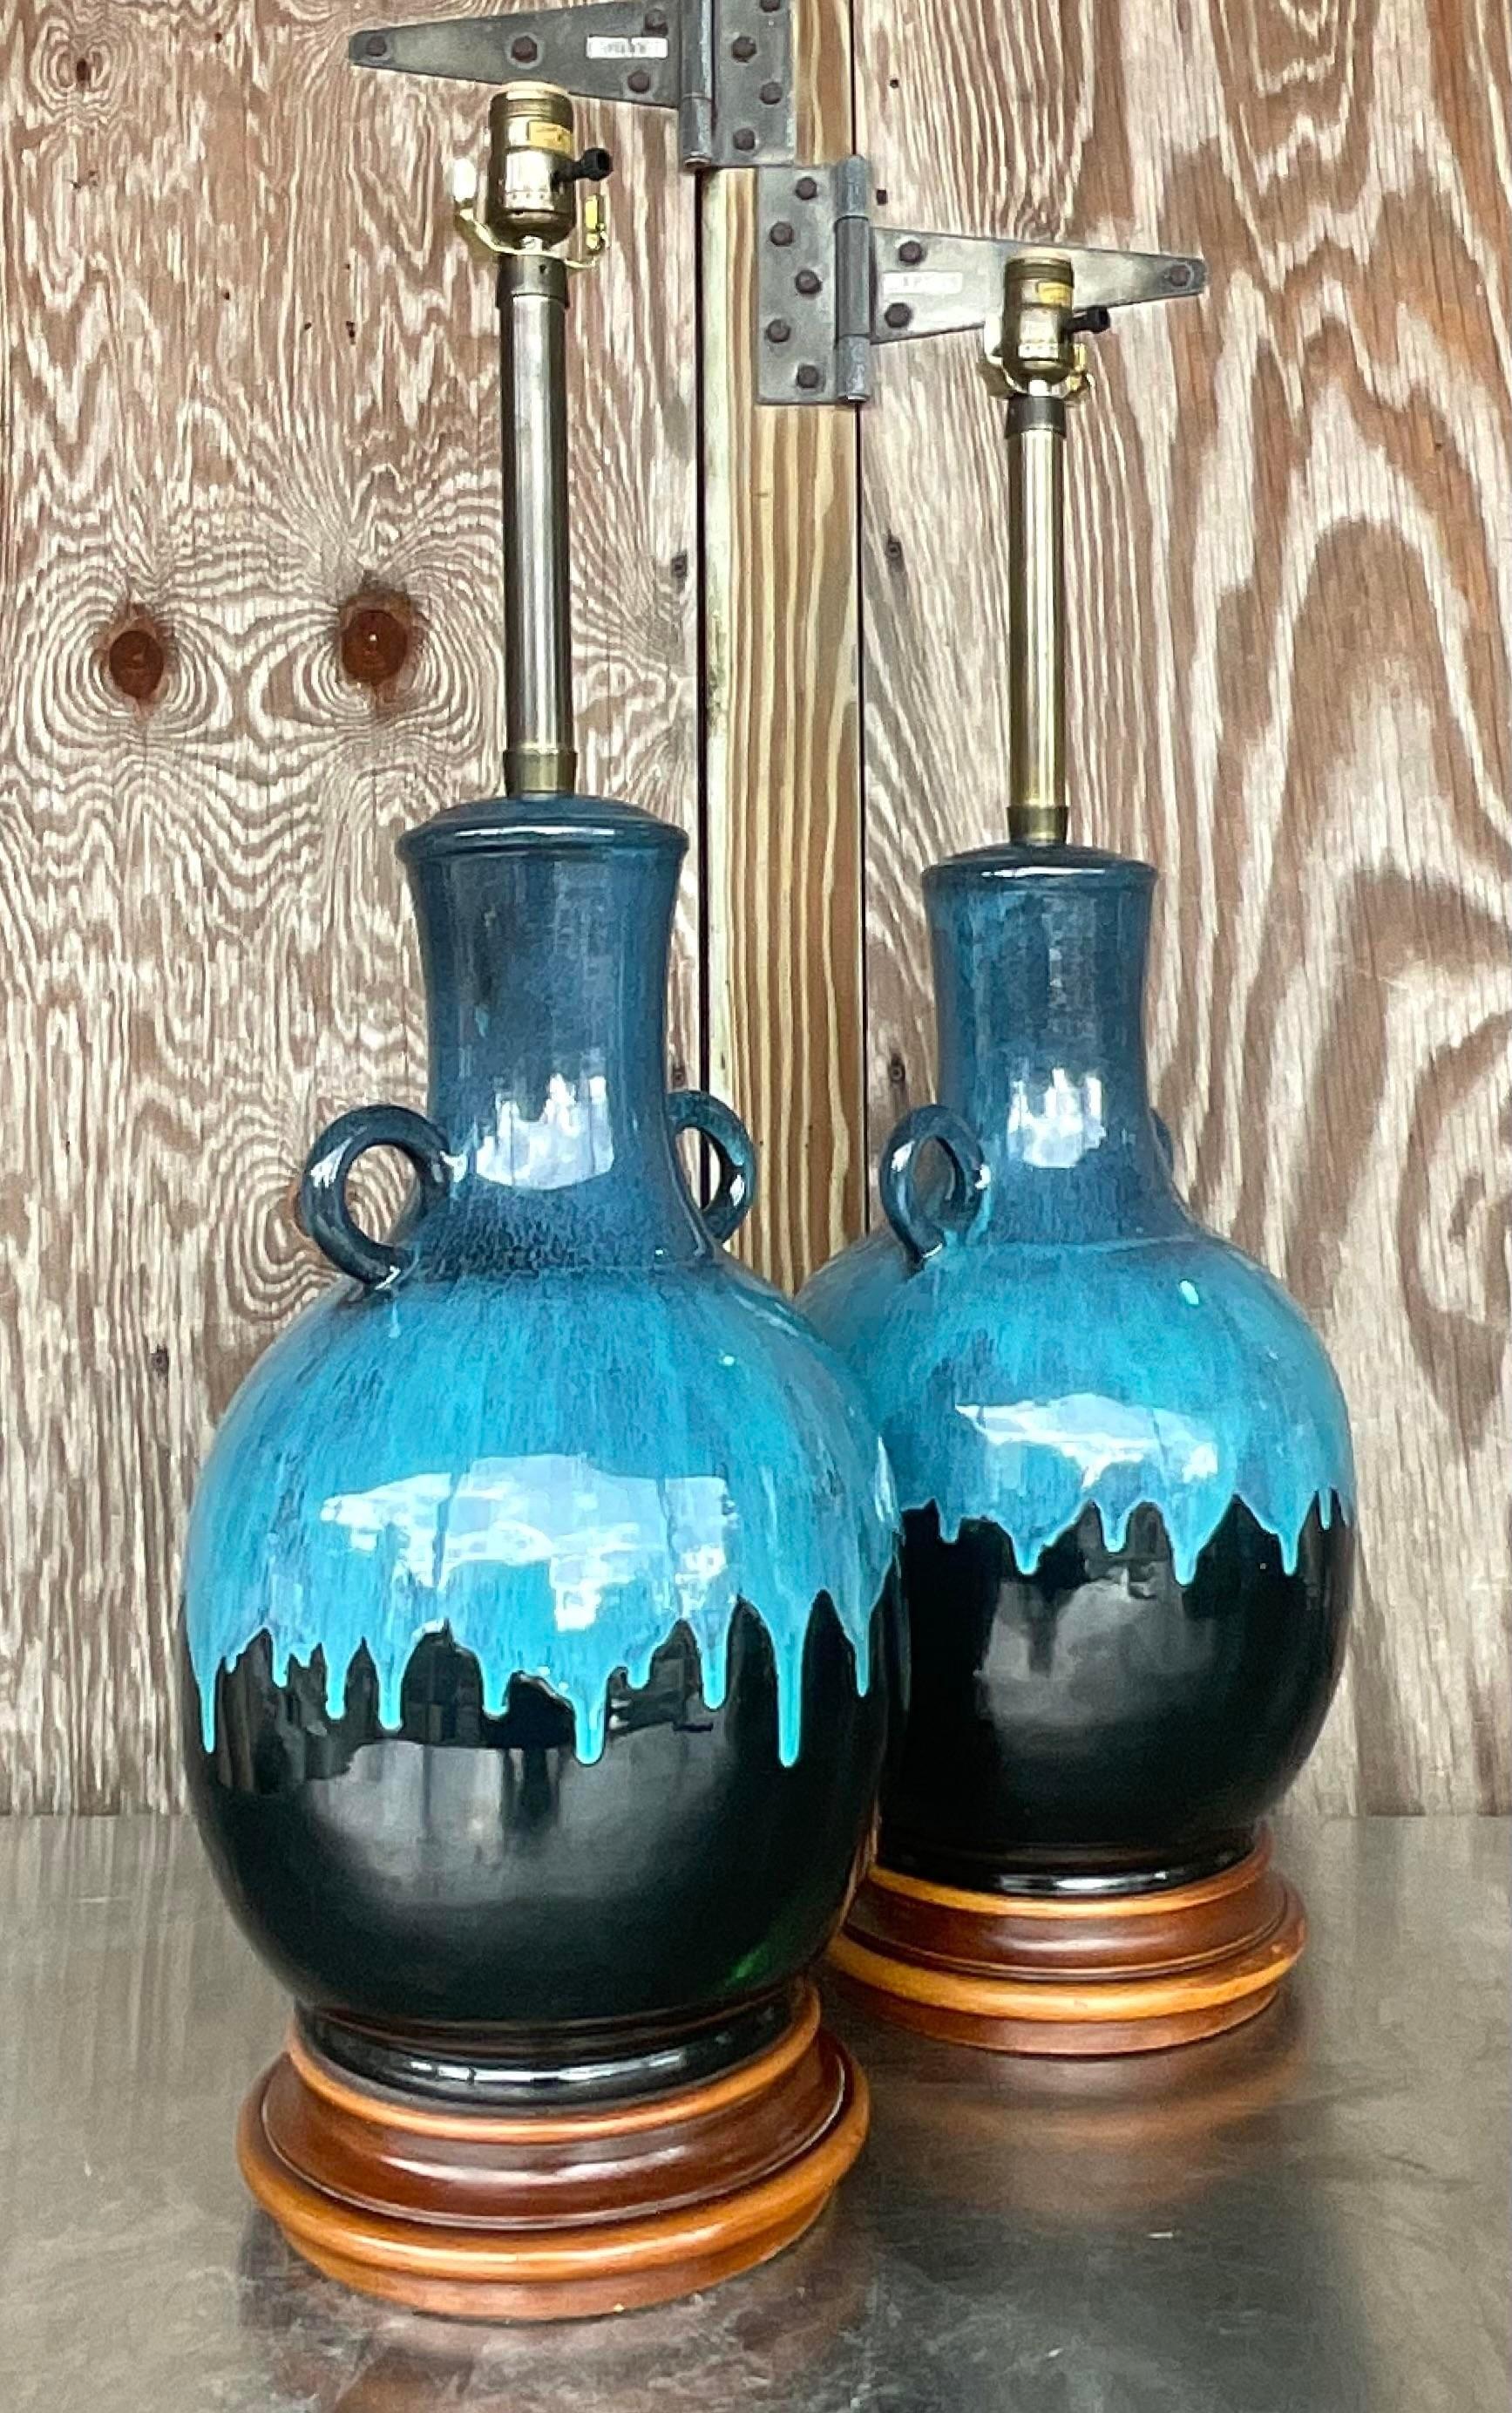 A fantastic pair of vintage Boho table lamps. A chic blue drip glaze on black ceramic. Rest of Burl wooden plinths. Fully restored with all new hardware and wiring. Acquired from a Miami estate.